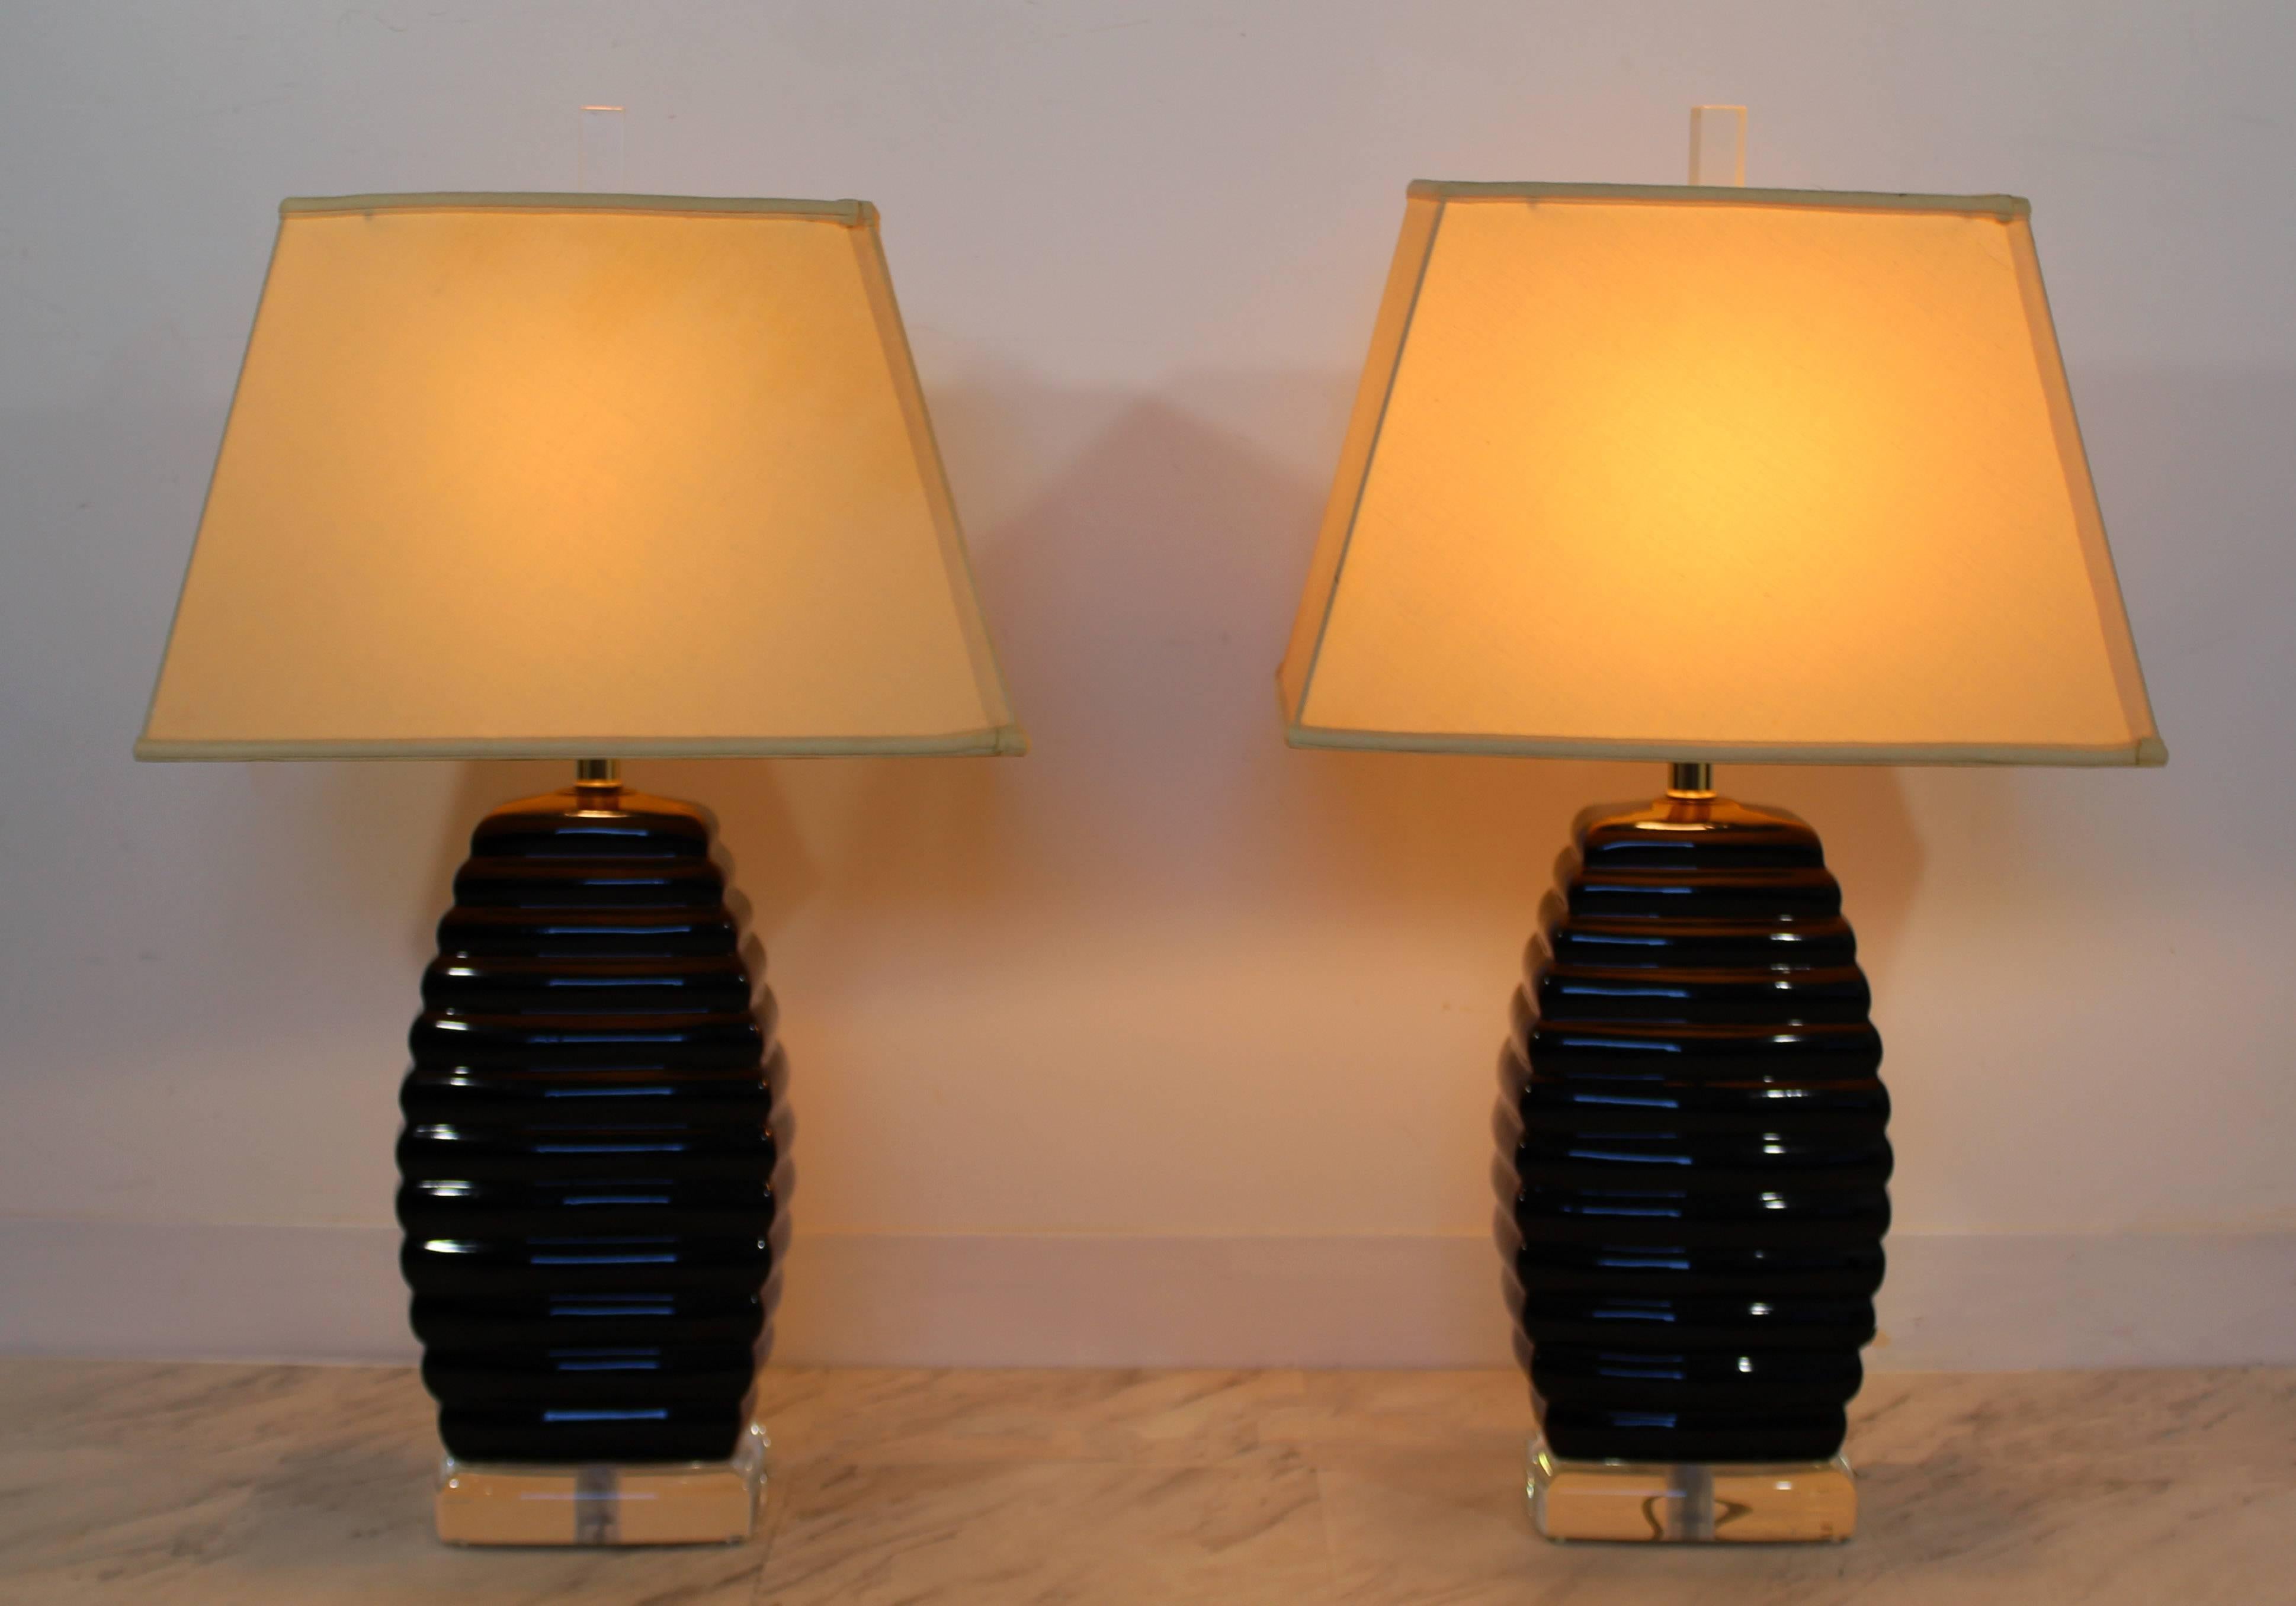 For your consideration is a gorgeous pair of Lucite table lamps, in the beehive style, with their original Lucite finials, by Bauer. In excellent condition. The dimensions of the lamps are 8.5